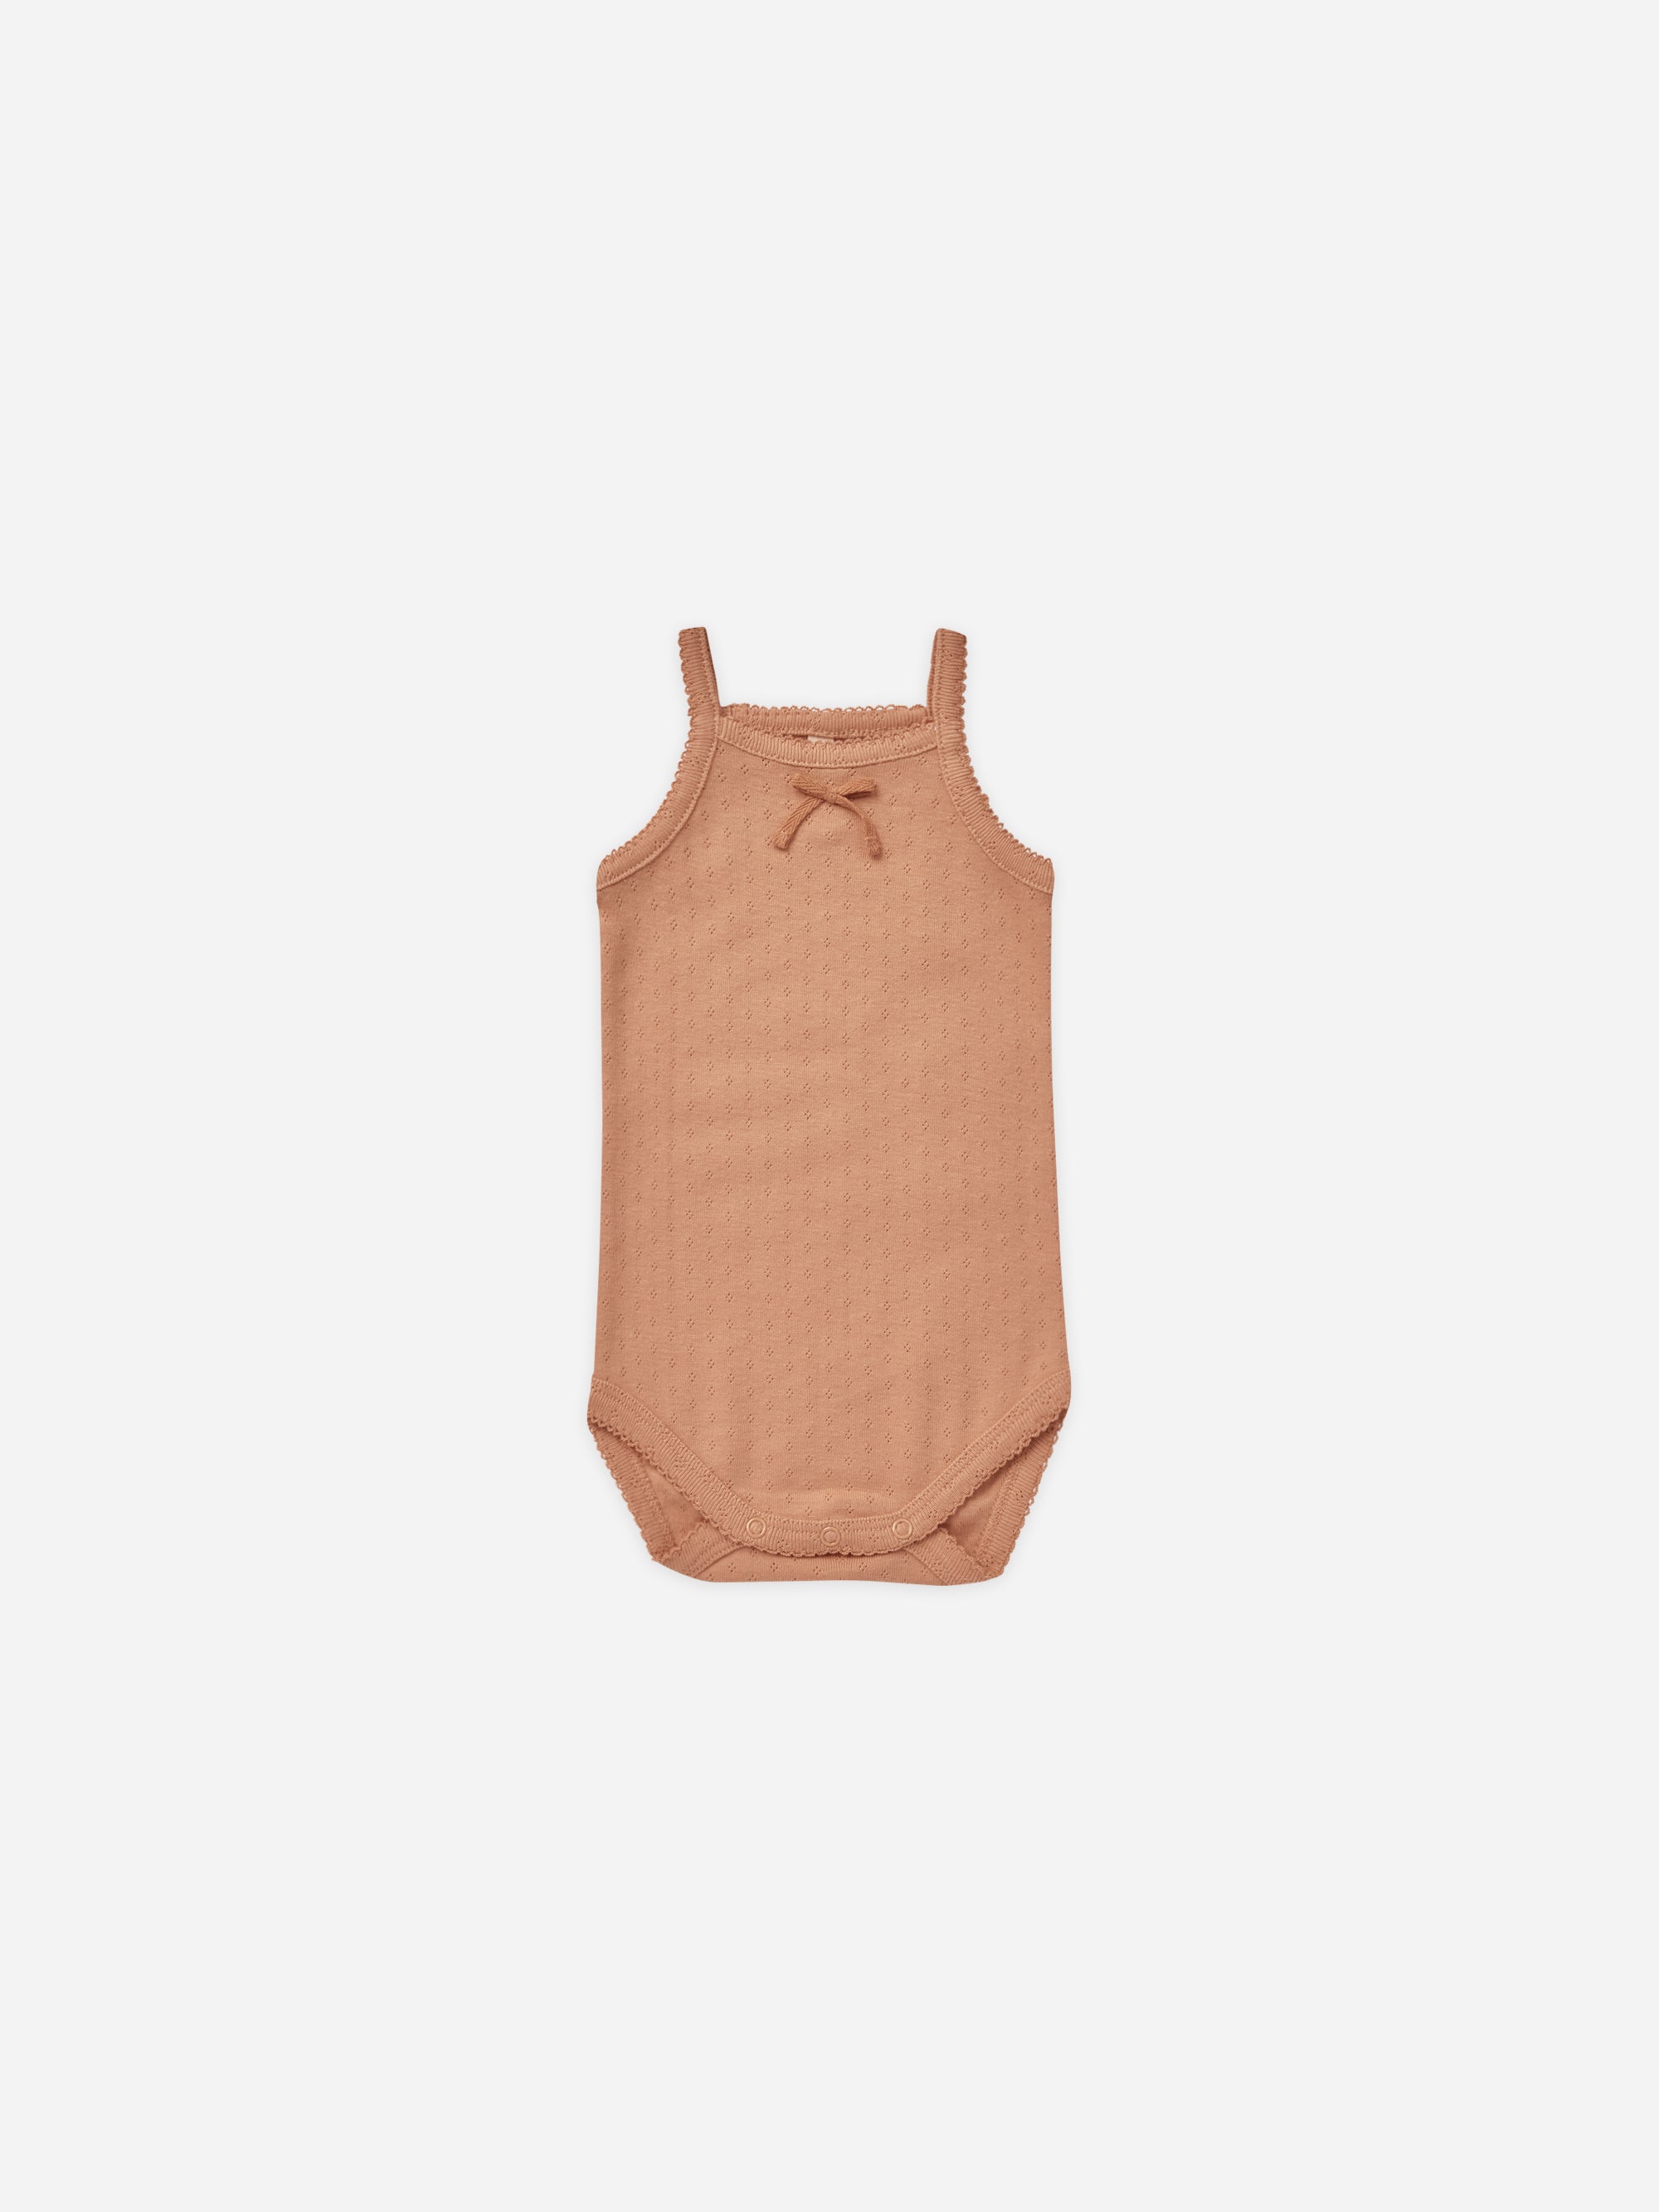 Pointelle Tank Bodysuit || Melon - Rylee + Cru | Kids Clothes | Trendy Baby Clothes | Modern Infant Outfits |